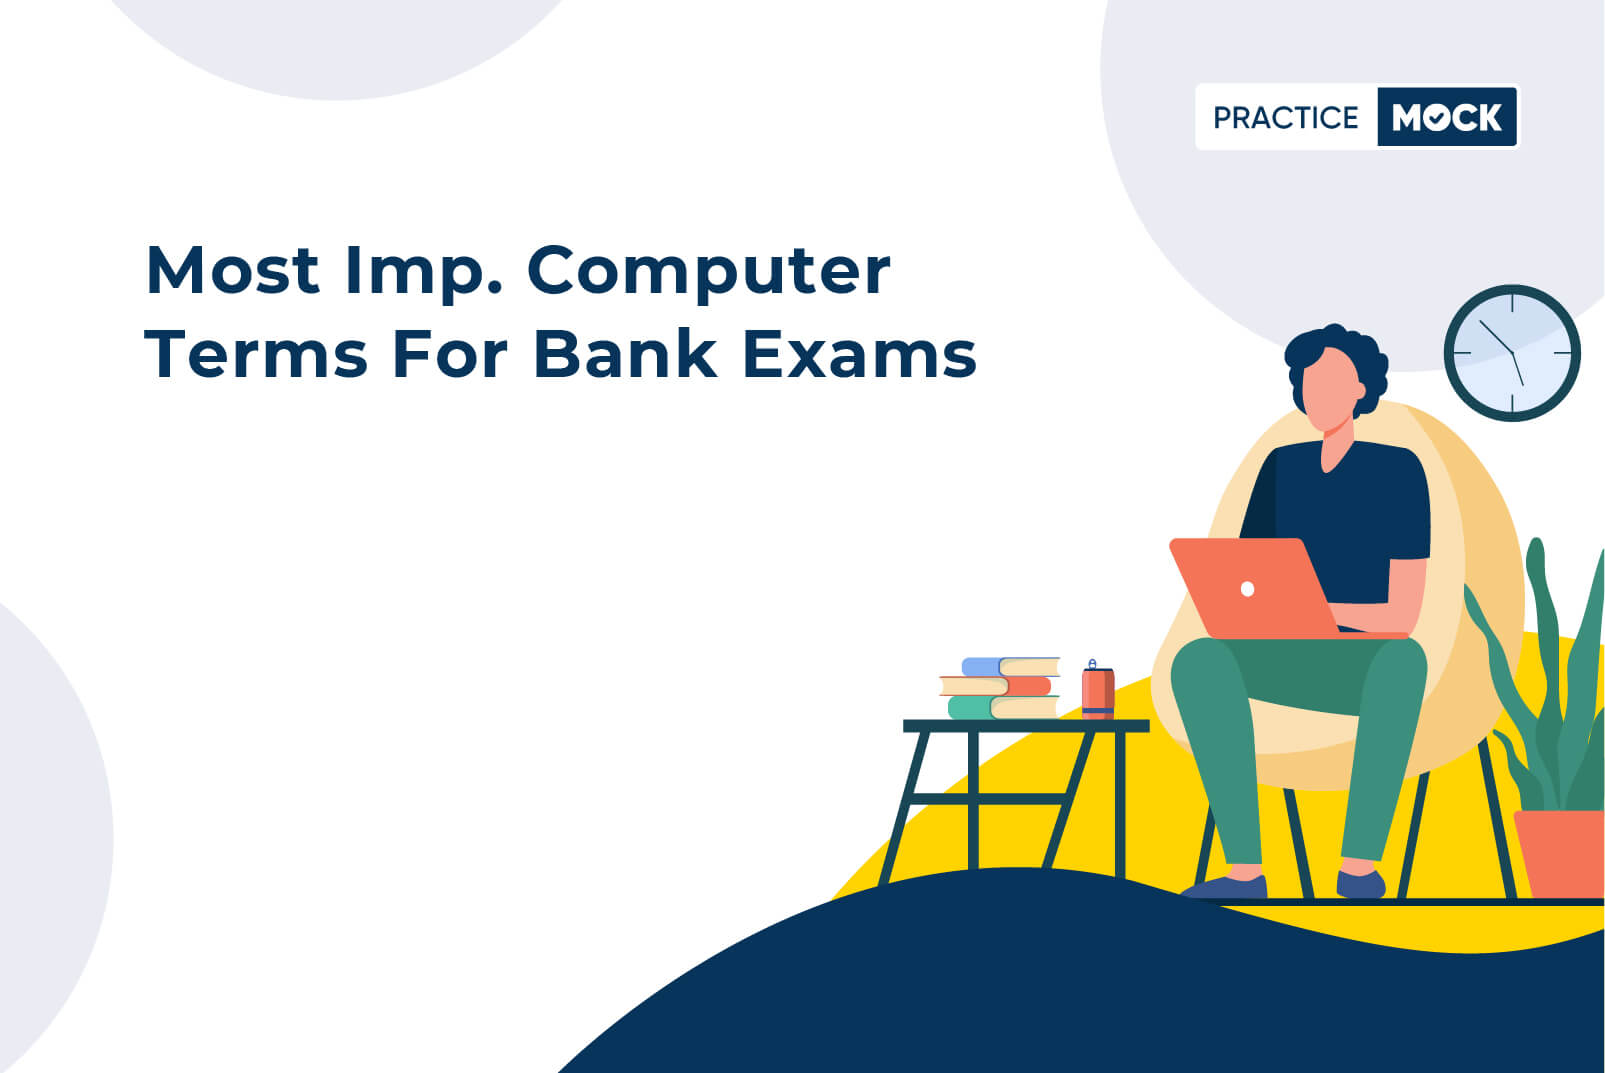 Most Imp. Computer Terms for Bank Exams